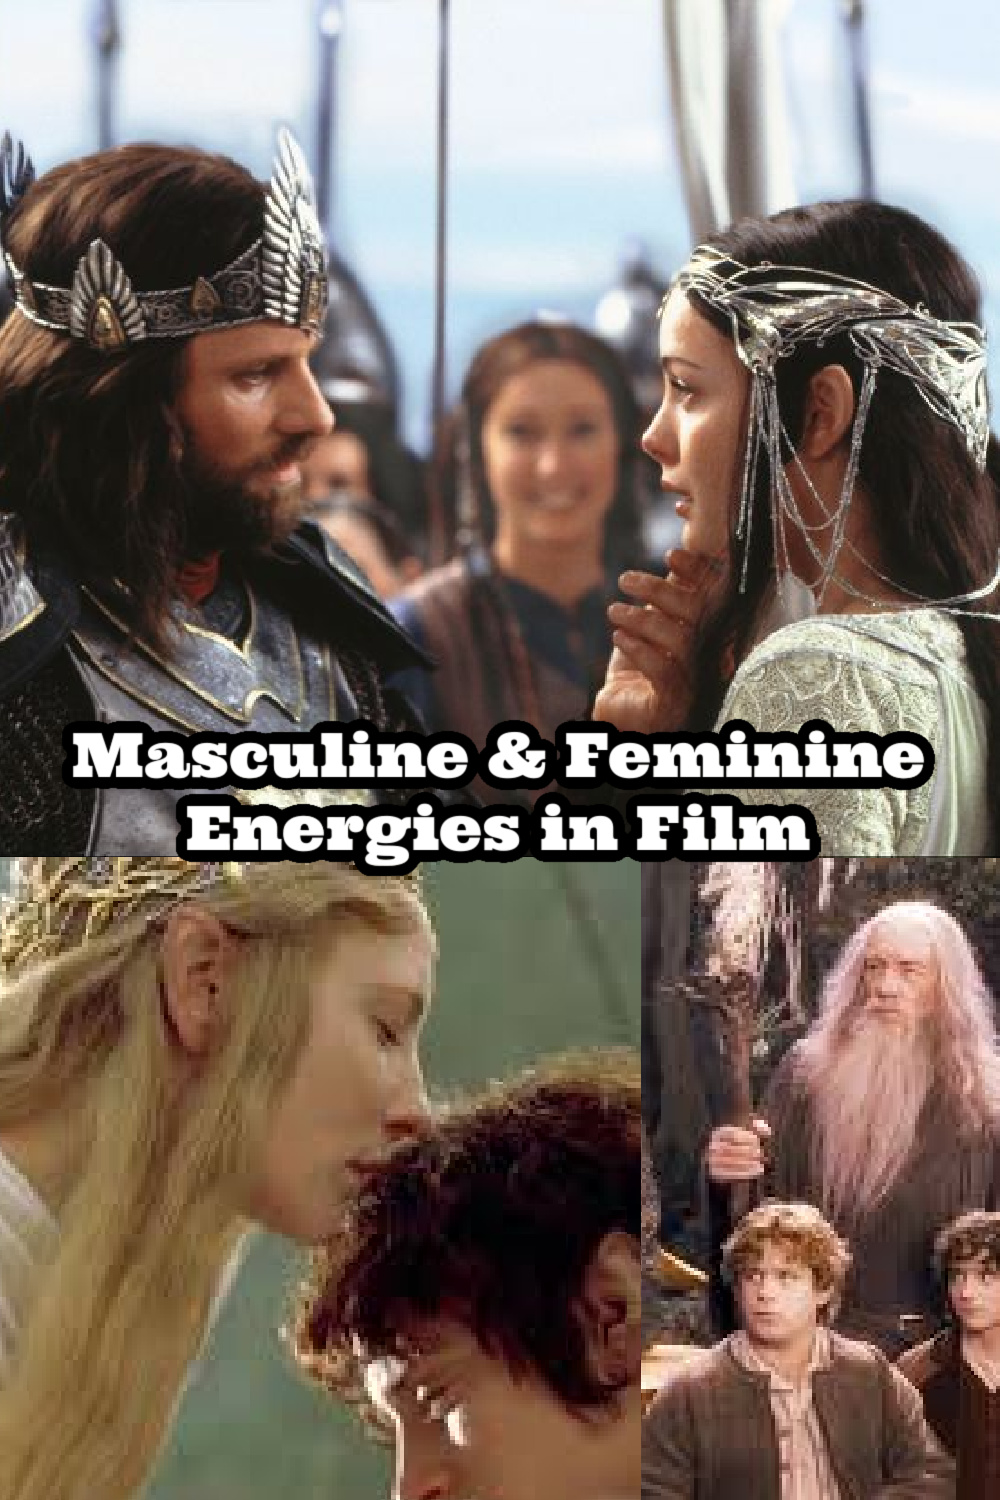 divine masculine and divine feminine energy, divine masculinity and femininity, toxic masculinity vs divine masculinity, ego vs soul, masculine ego vs feminine ego, dangers of the masculine ego, divine masculinity, masculine energy purpose, why aragorn is the epitome of masculinity, the four masculine archetypes, male ego vs female ego, aragorn and arwen analysis, ego and soul difference, divine masculine energy vs masculinity, lord of the rings masculinity, lord of the rings character analysis, masculine and feminine energy, masculine and feminine energy in relationships, understanding masculine and feminine energy, sexual polarity in relationships, sexual polarity, Everyday starlet, sarah blodgett,